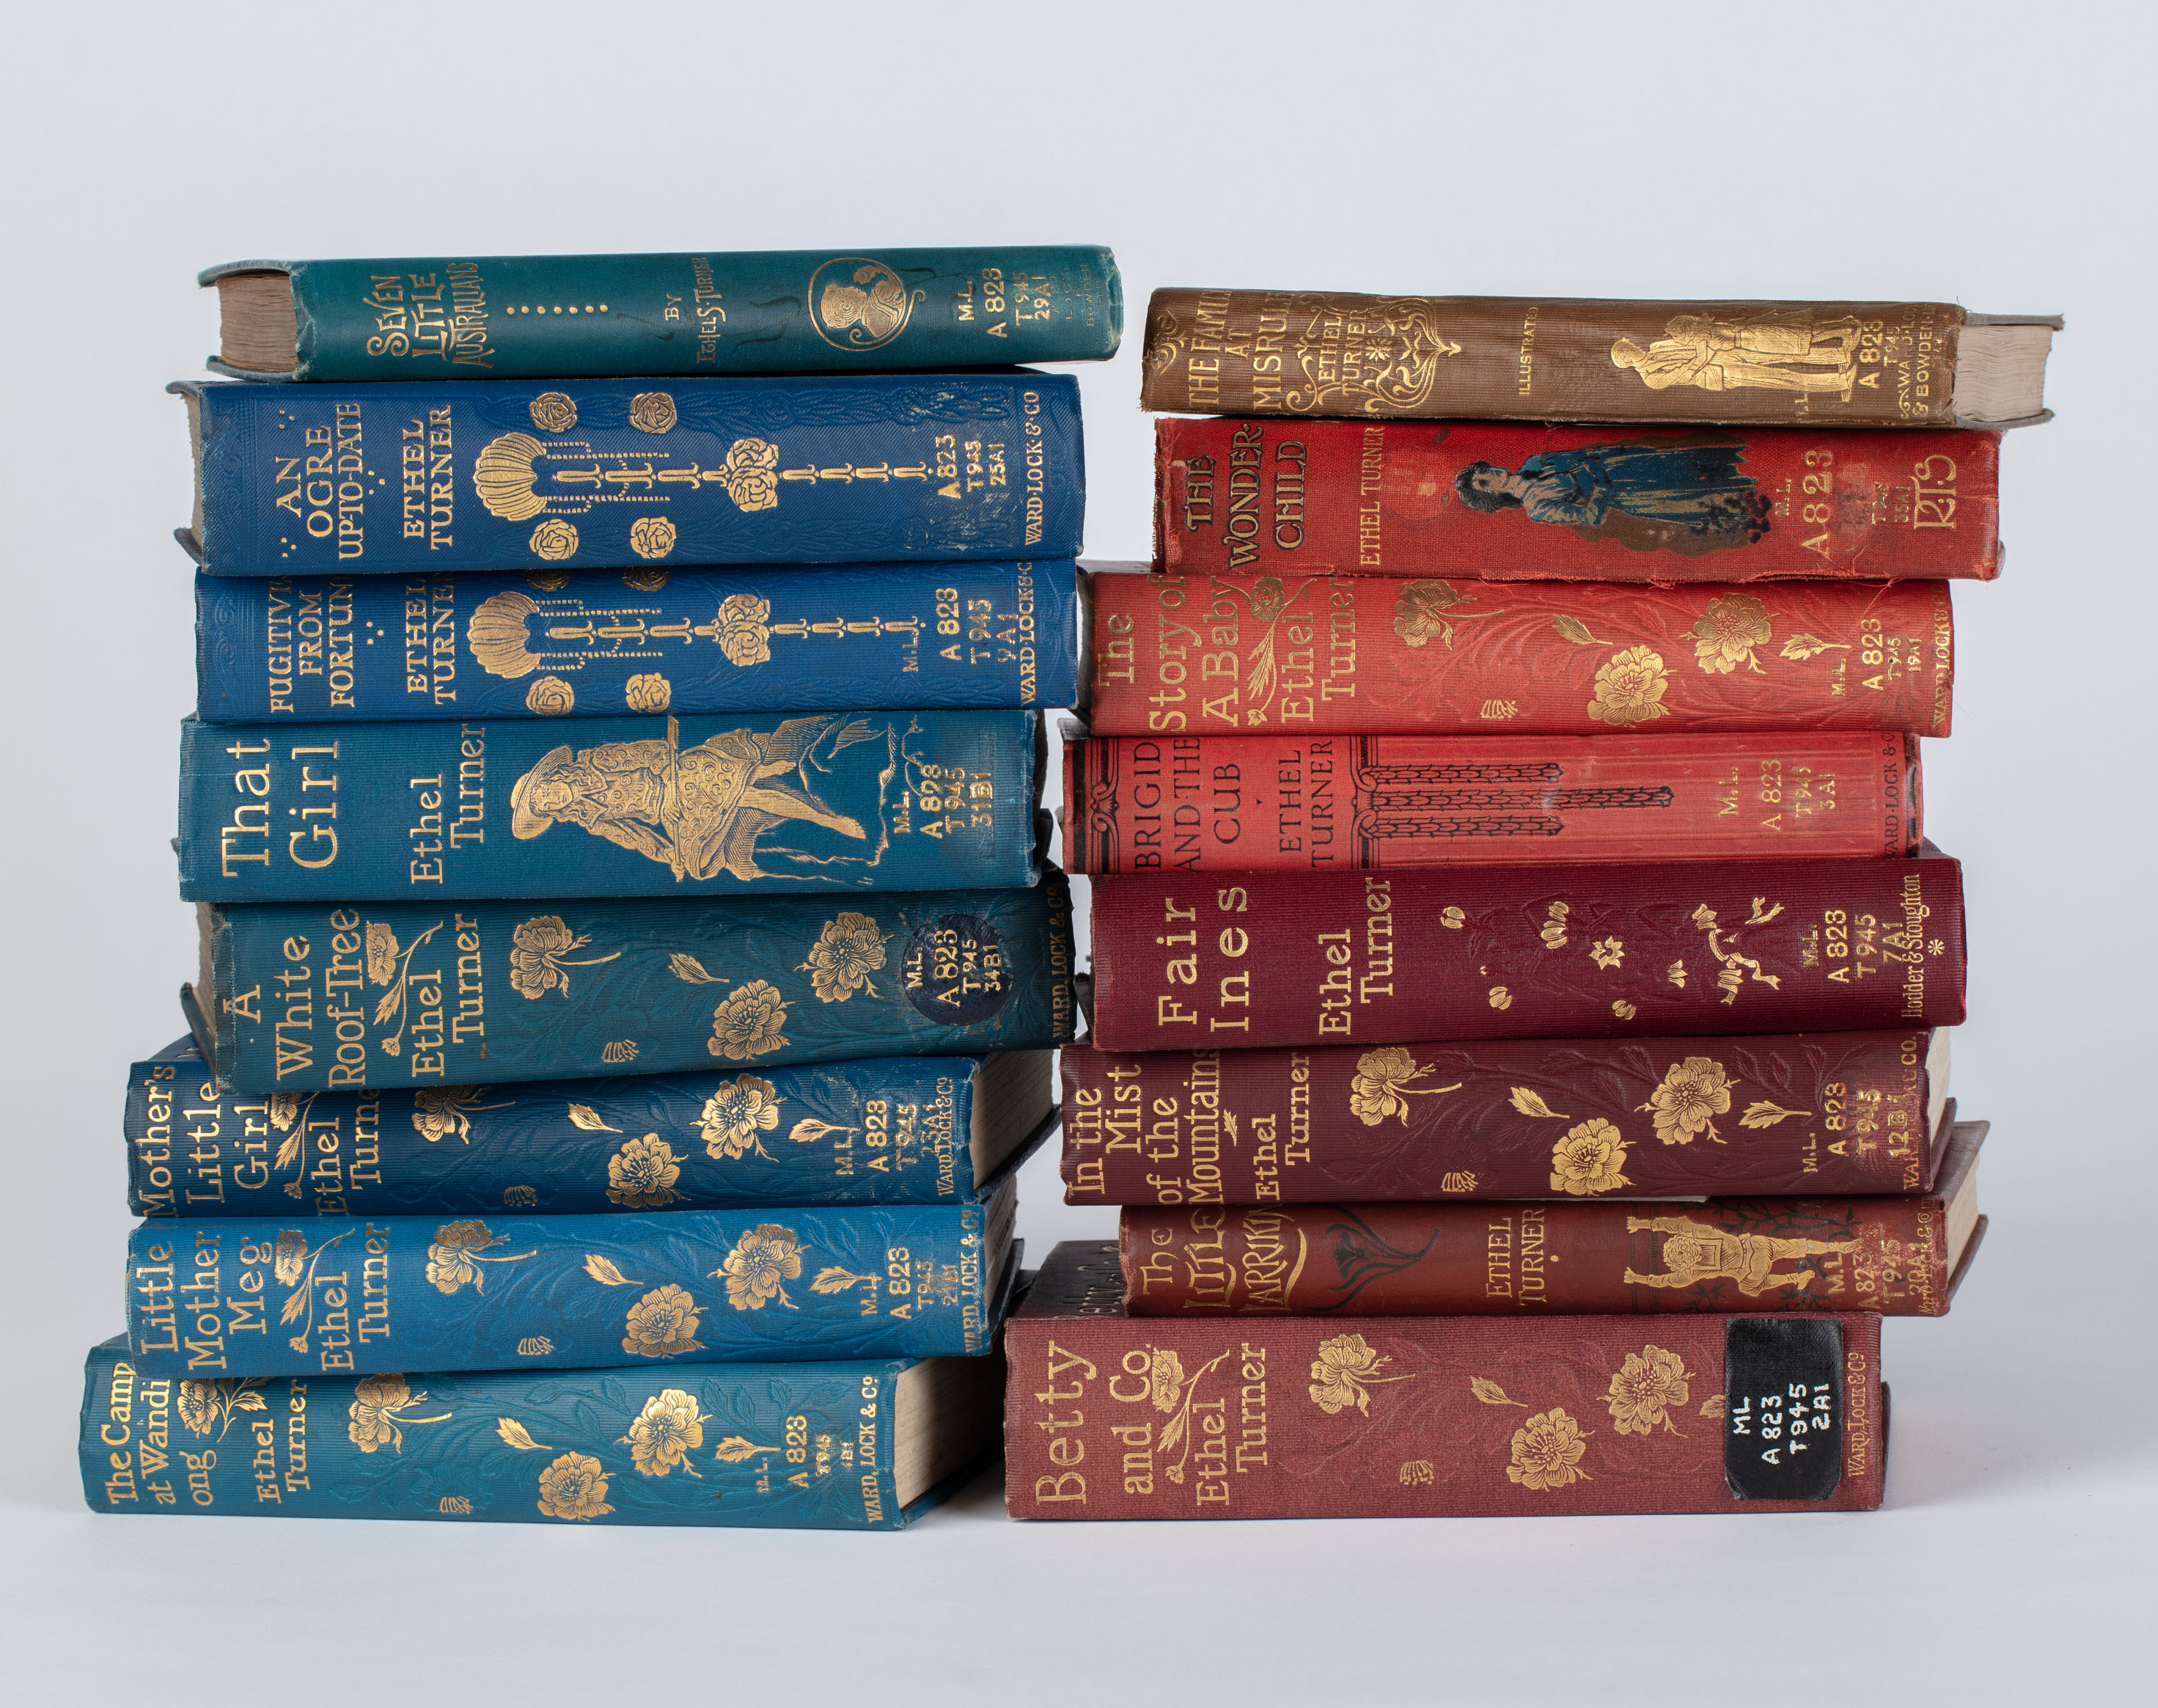 Stack of books by Ethel Turn